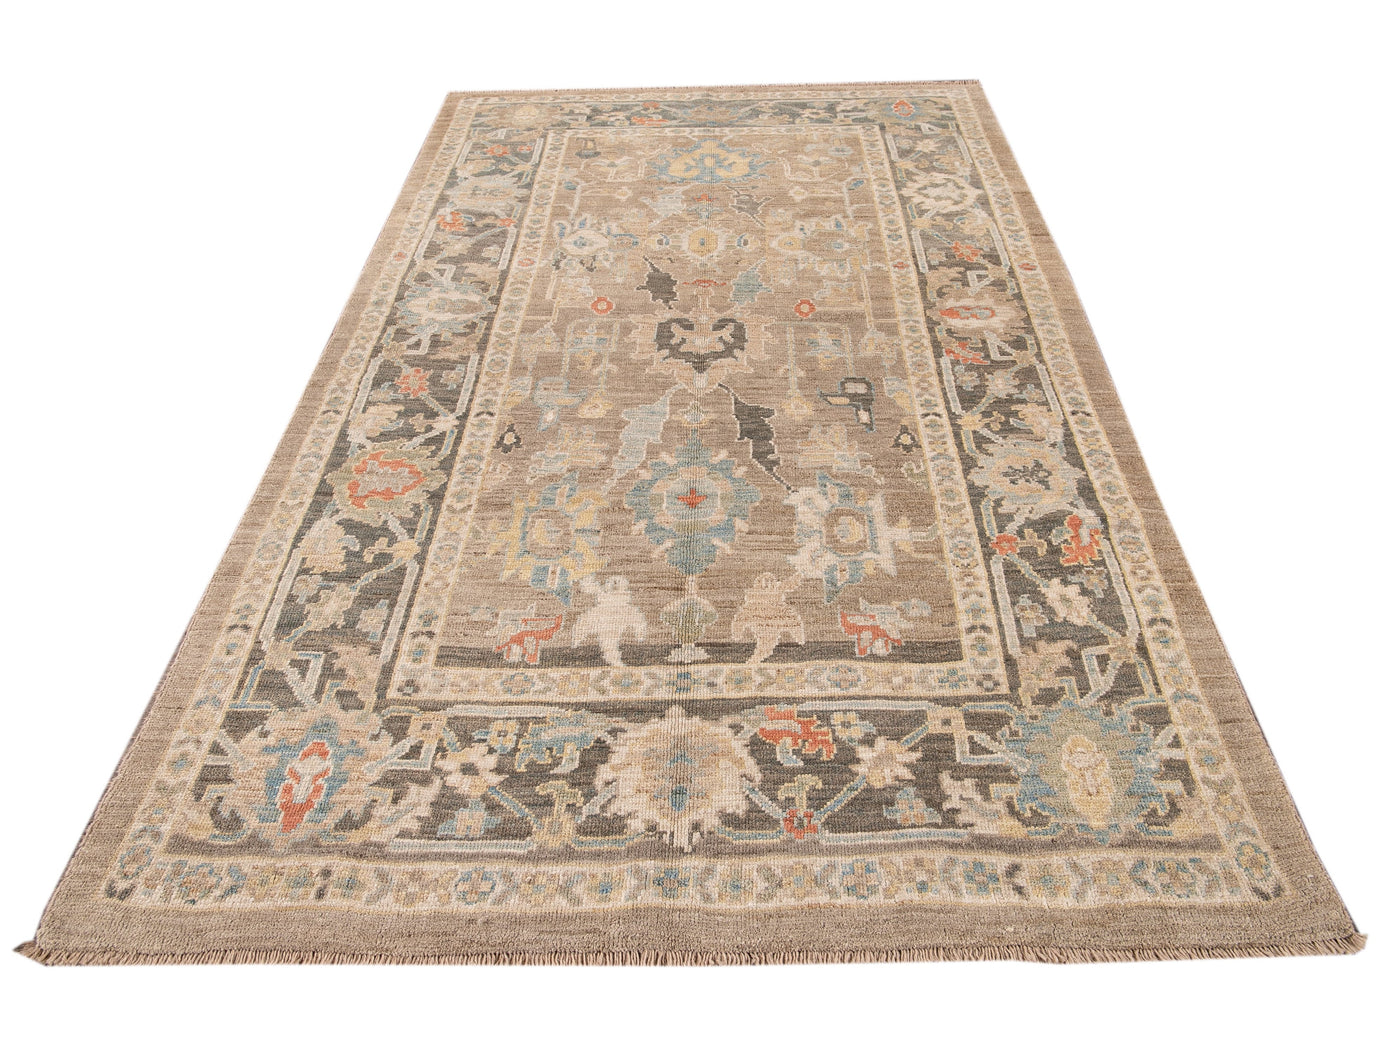 Modern Sultanabad Beige and Gray Handmade Floral Wool Rug